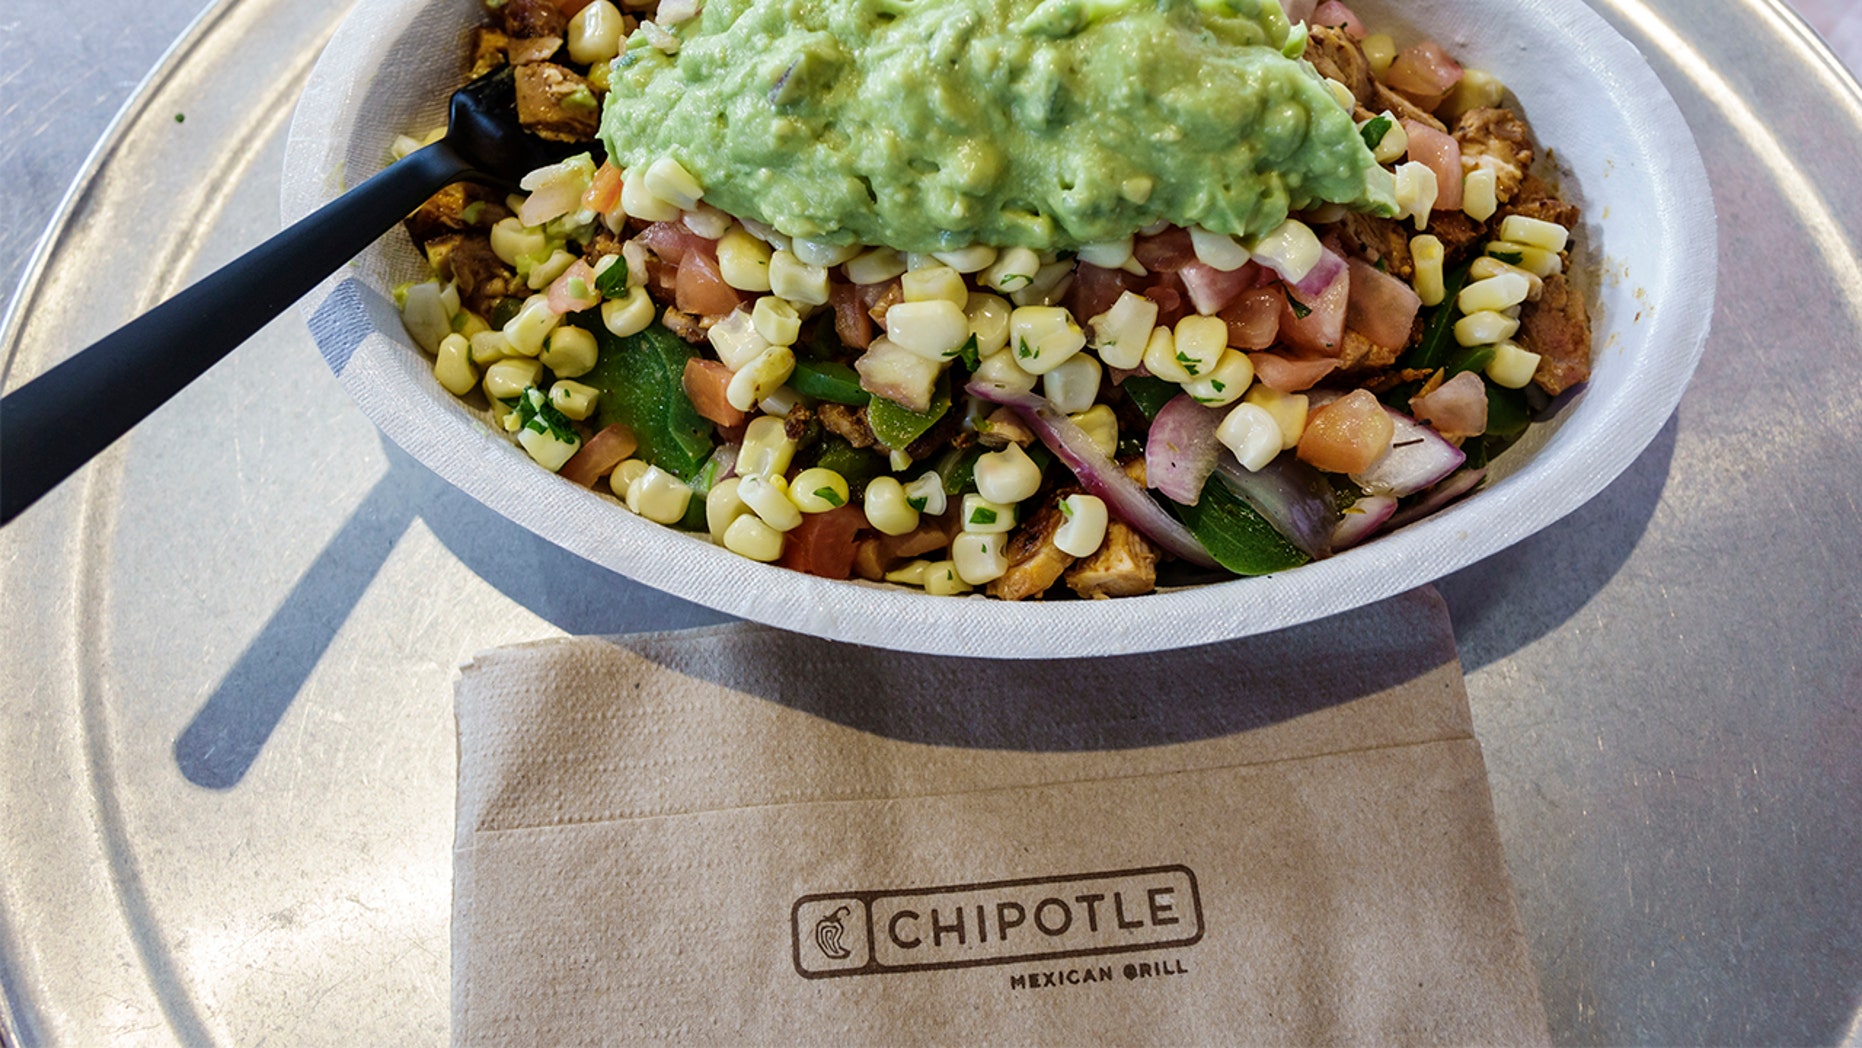 Chipotle employee who went viral for bowl-flipping trick says 